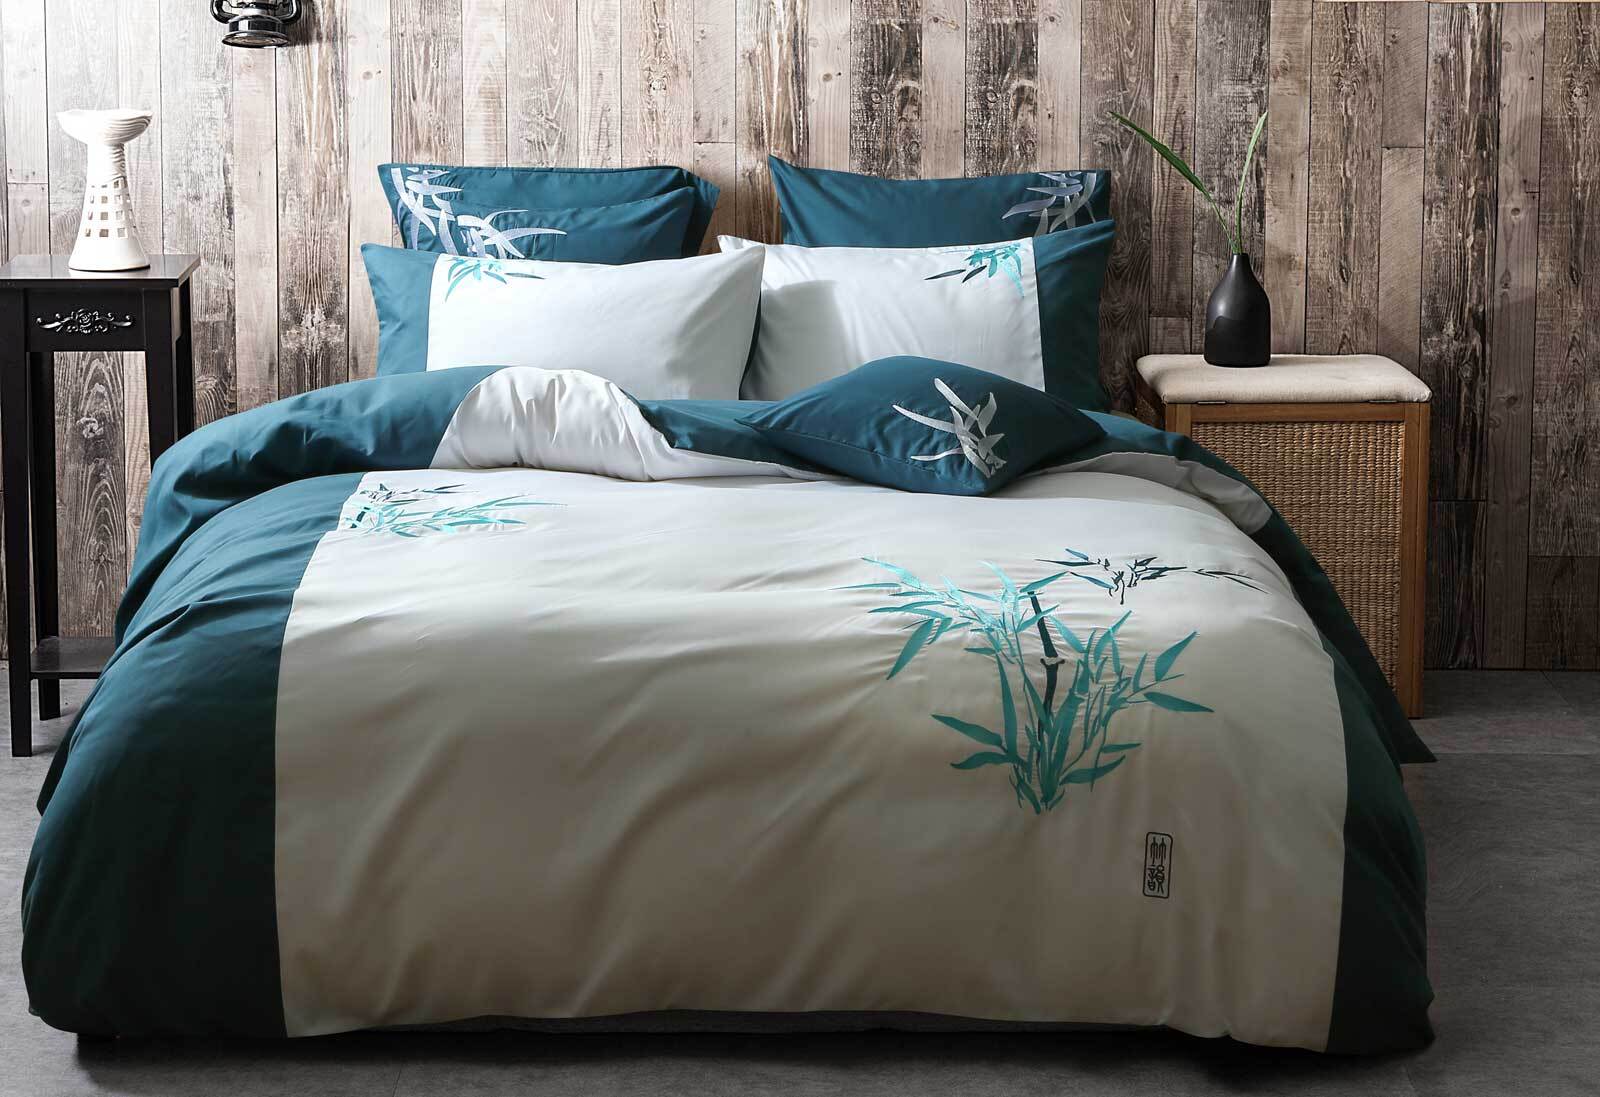 Luxton Oriental Bamboo Teal Aqua Quilt, Grey And Teal Super King Bedding